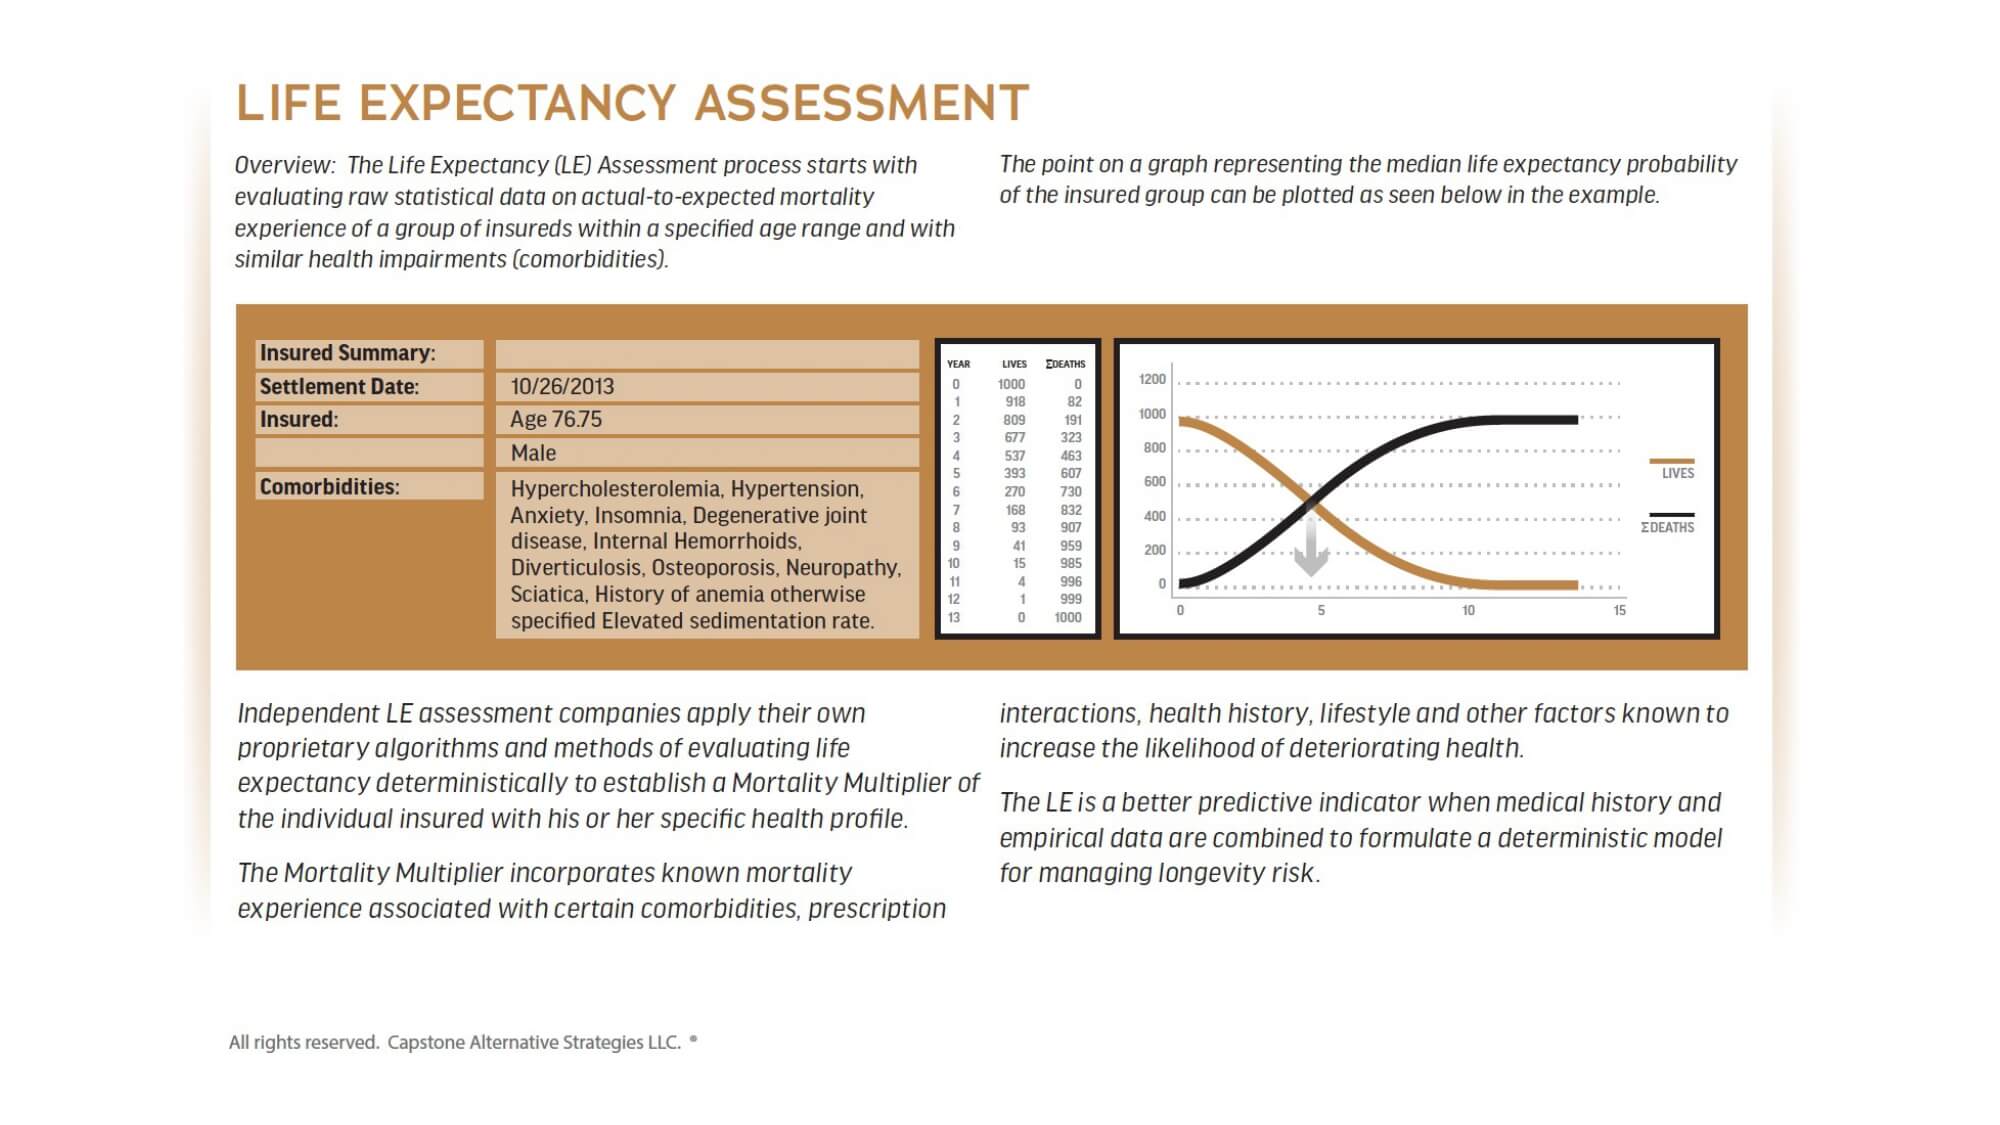 CAS - Marketing - Life Expectancy Assessment - Infographic - 20210526_page-0001